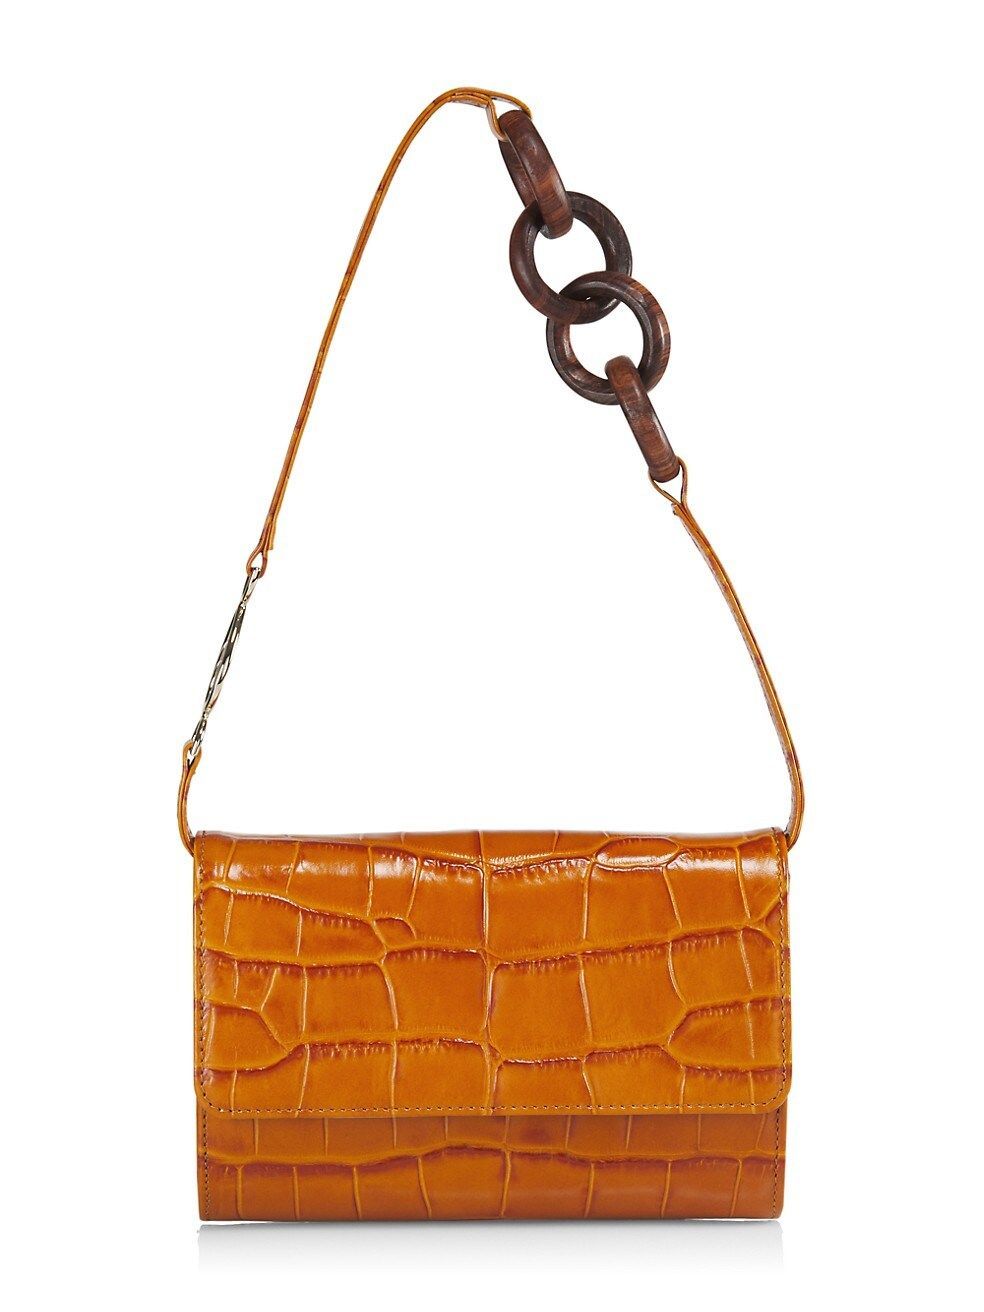 Leather Bags and Small Leather Goods - Le Tanneur